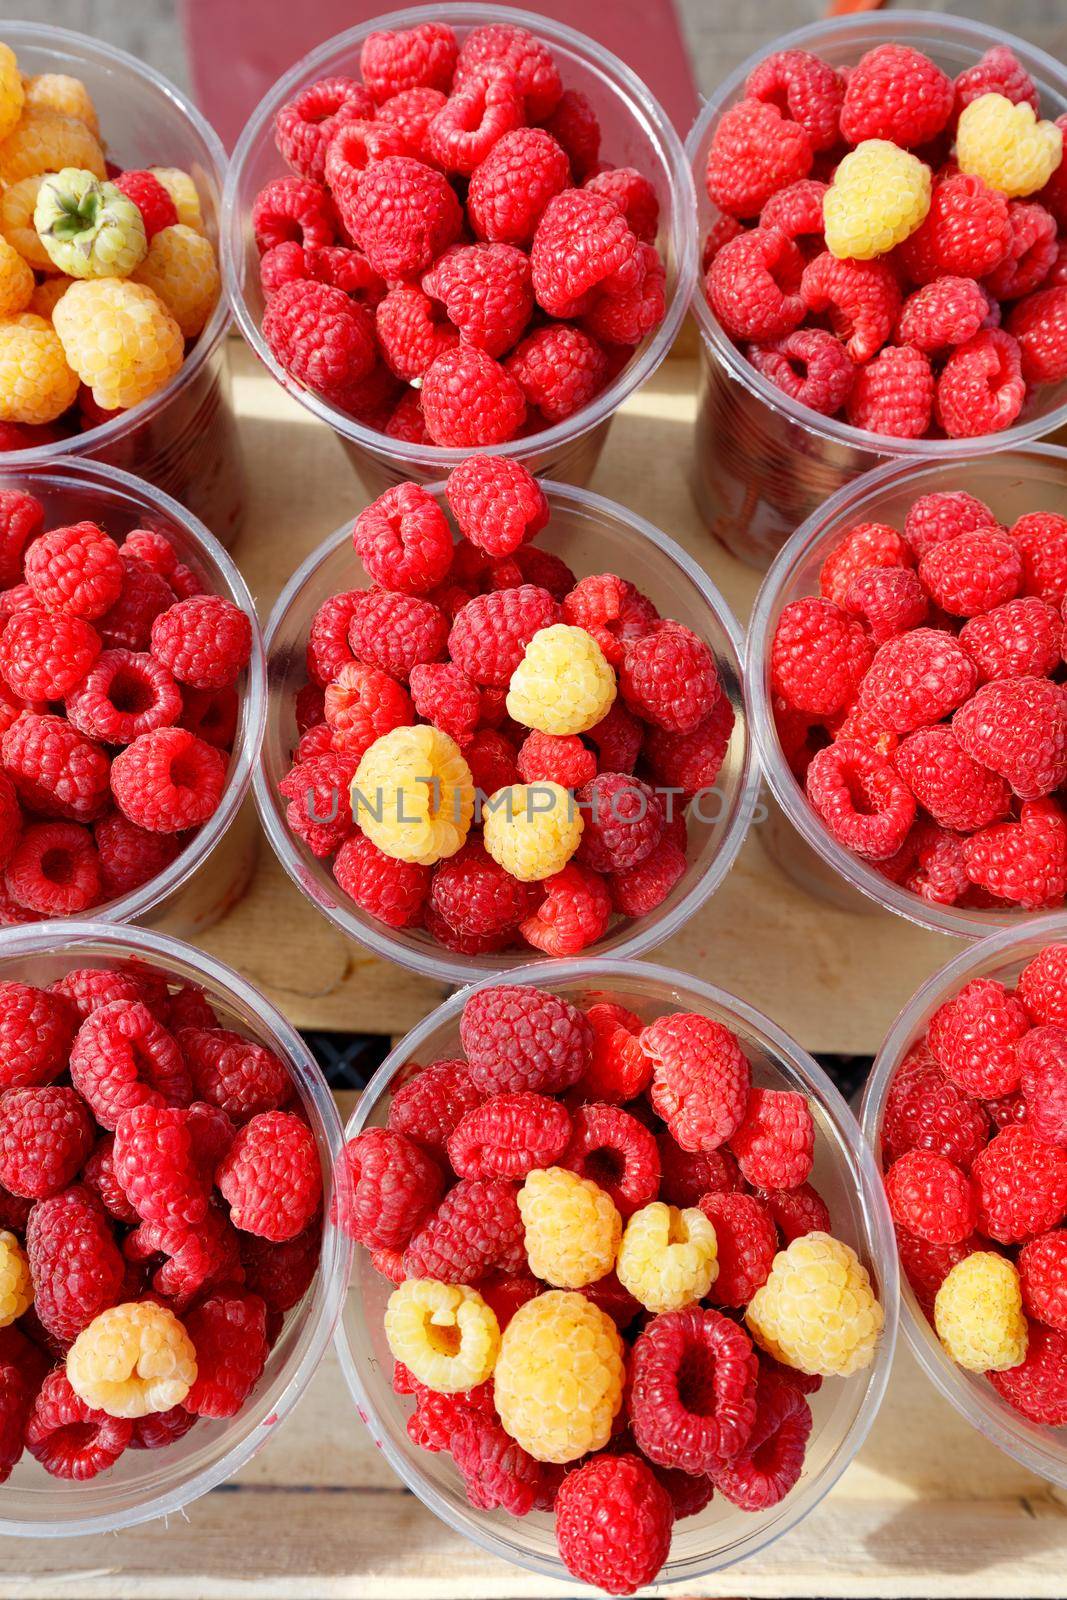 Red and yellow raspberries are collected in plastic cups on the counter. by Sergii